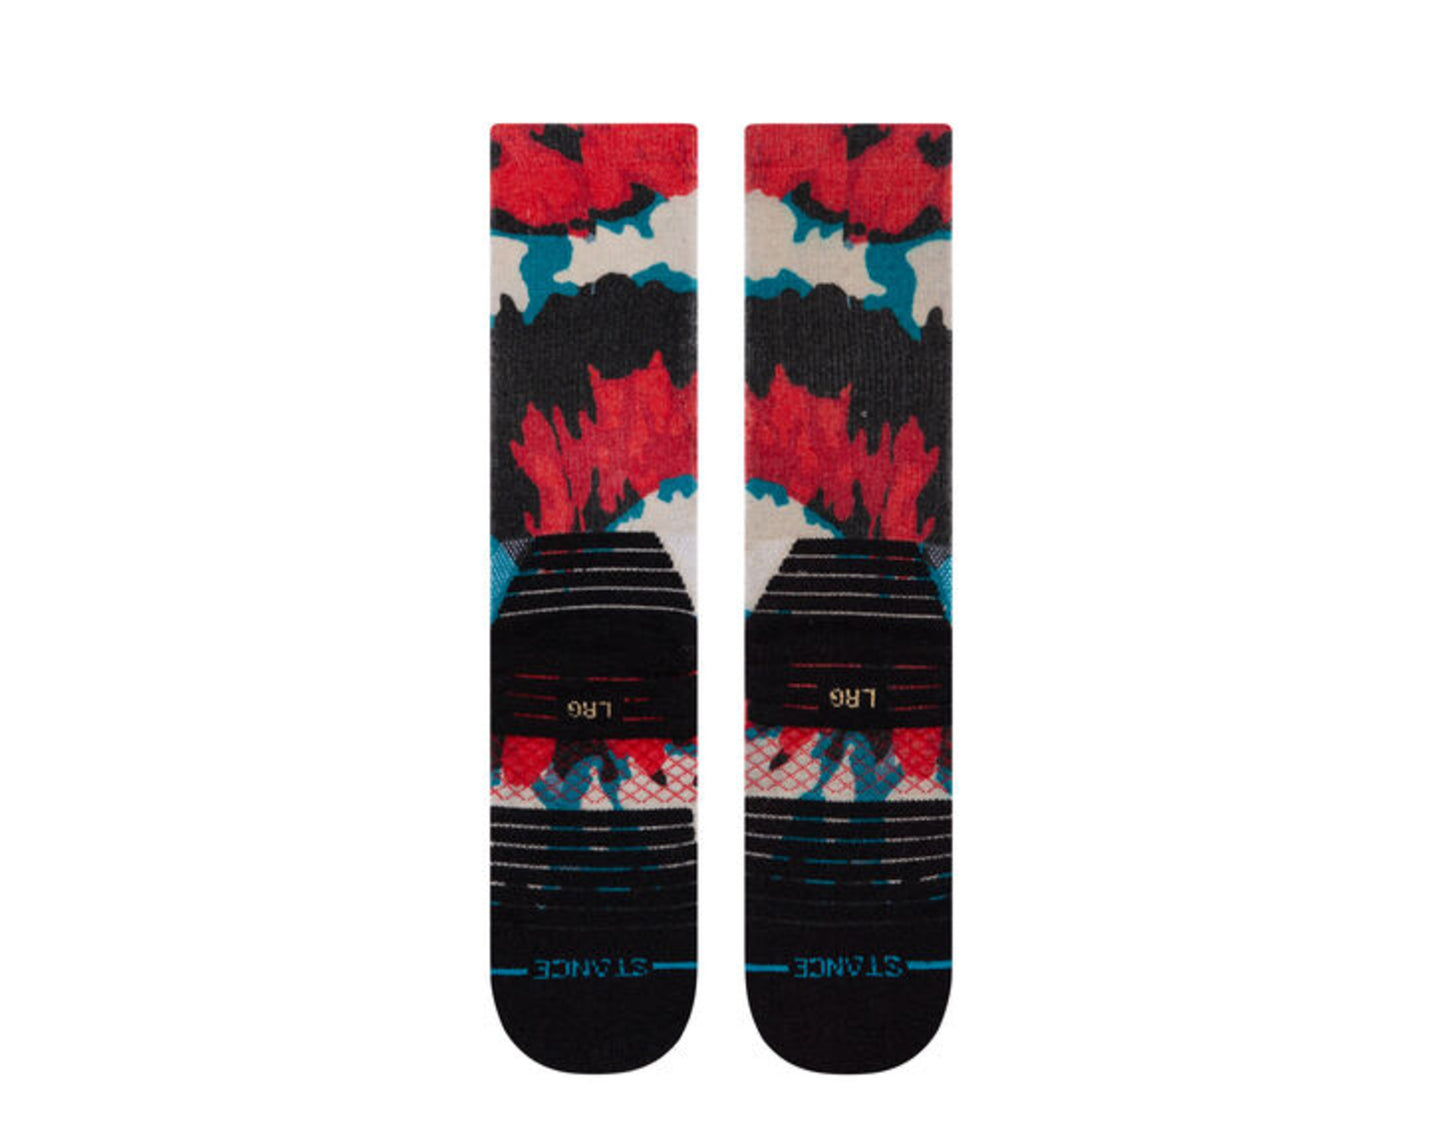 Stance Feel 360 - Stance x Dr. Seuss Cat In The Hat Hike Crew Socks